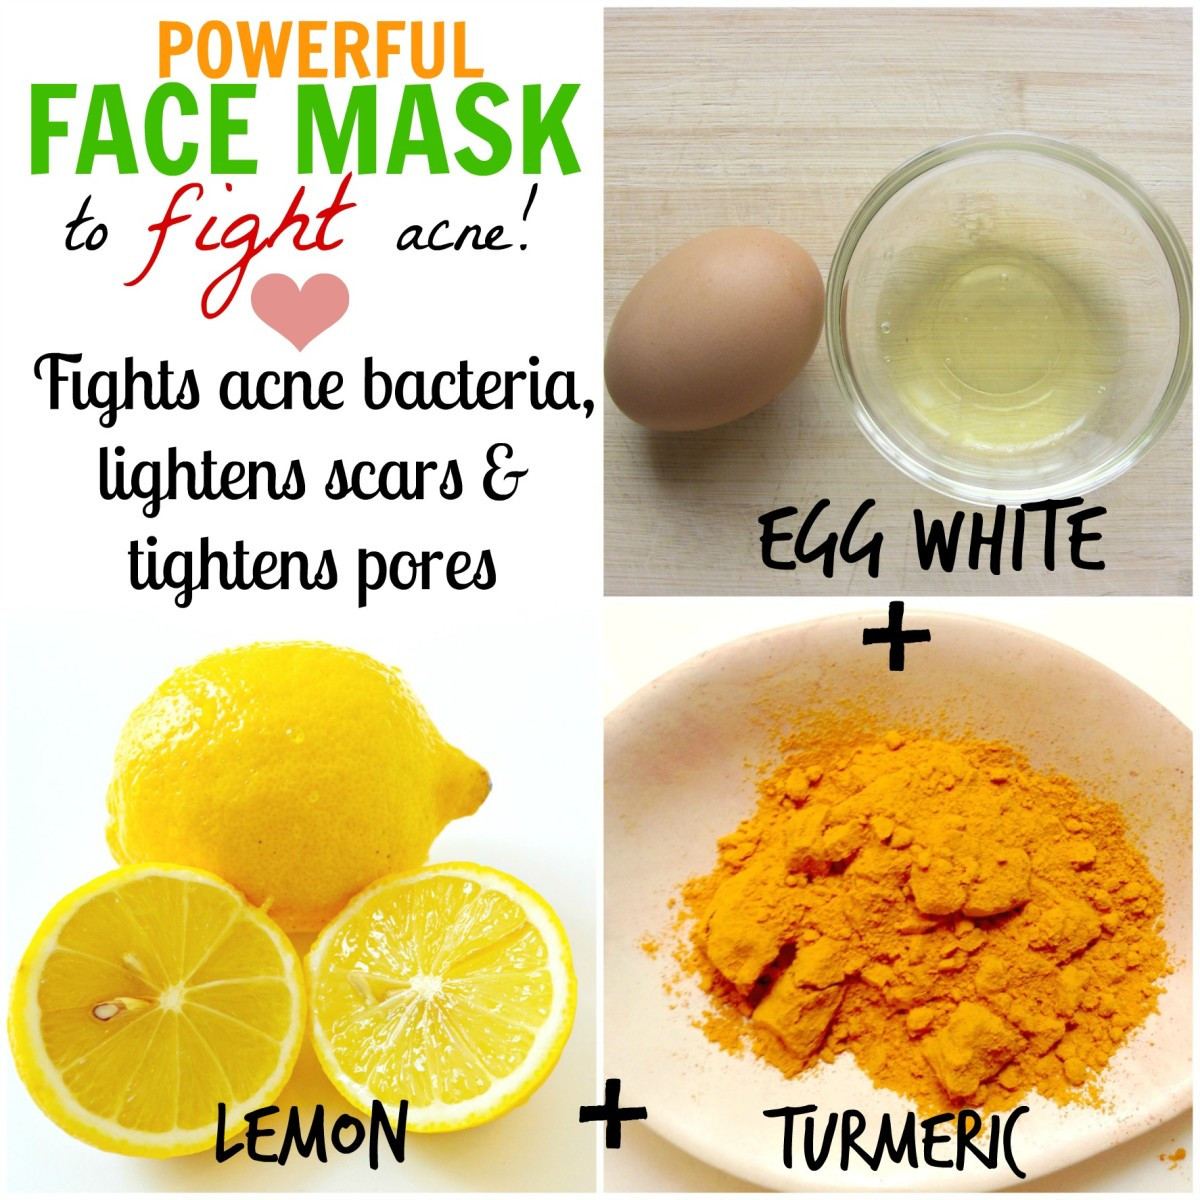 DIY Face Masks For Acne
 DIY Homemade Face Masks for Acne How to Stop Pimples